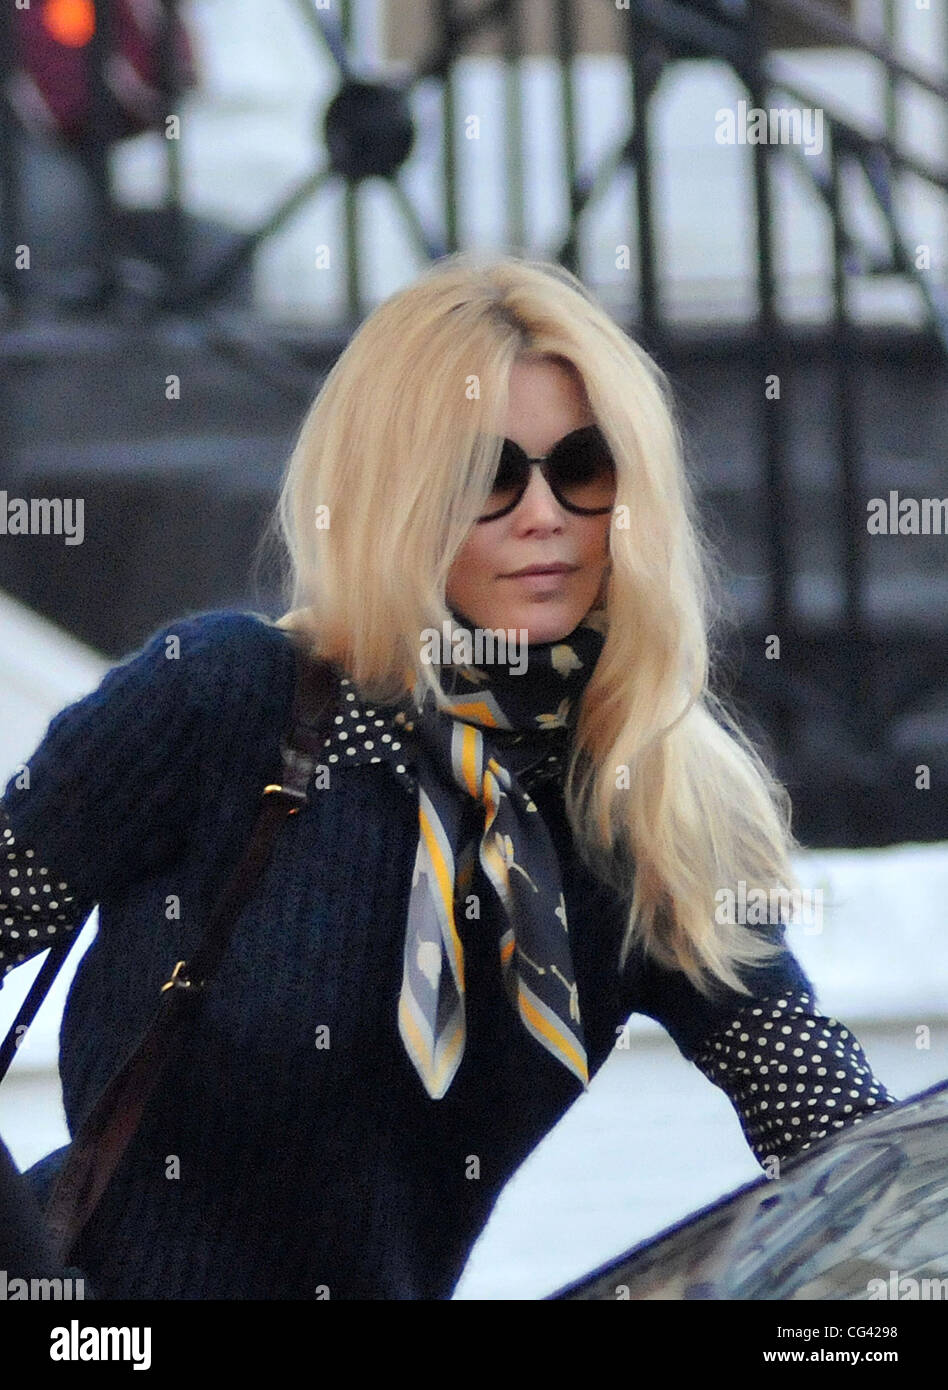 Claudia Schiffer  after dropping her children at school London, England - 18.01.11 Stock Photo